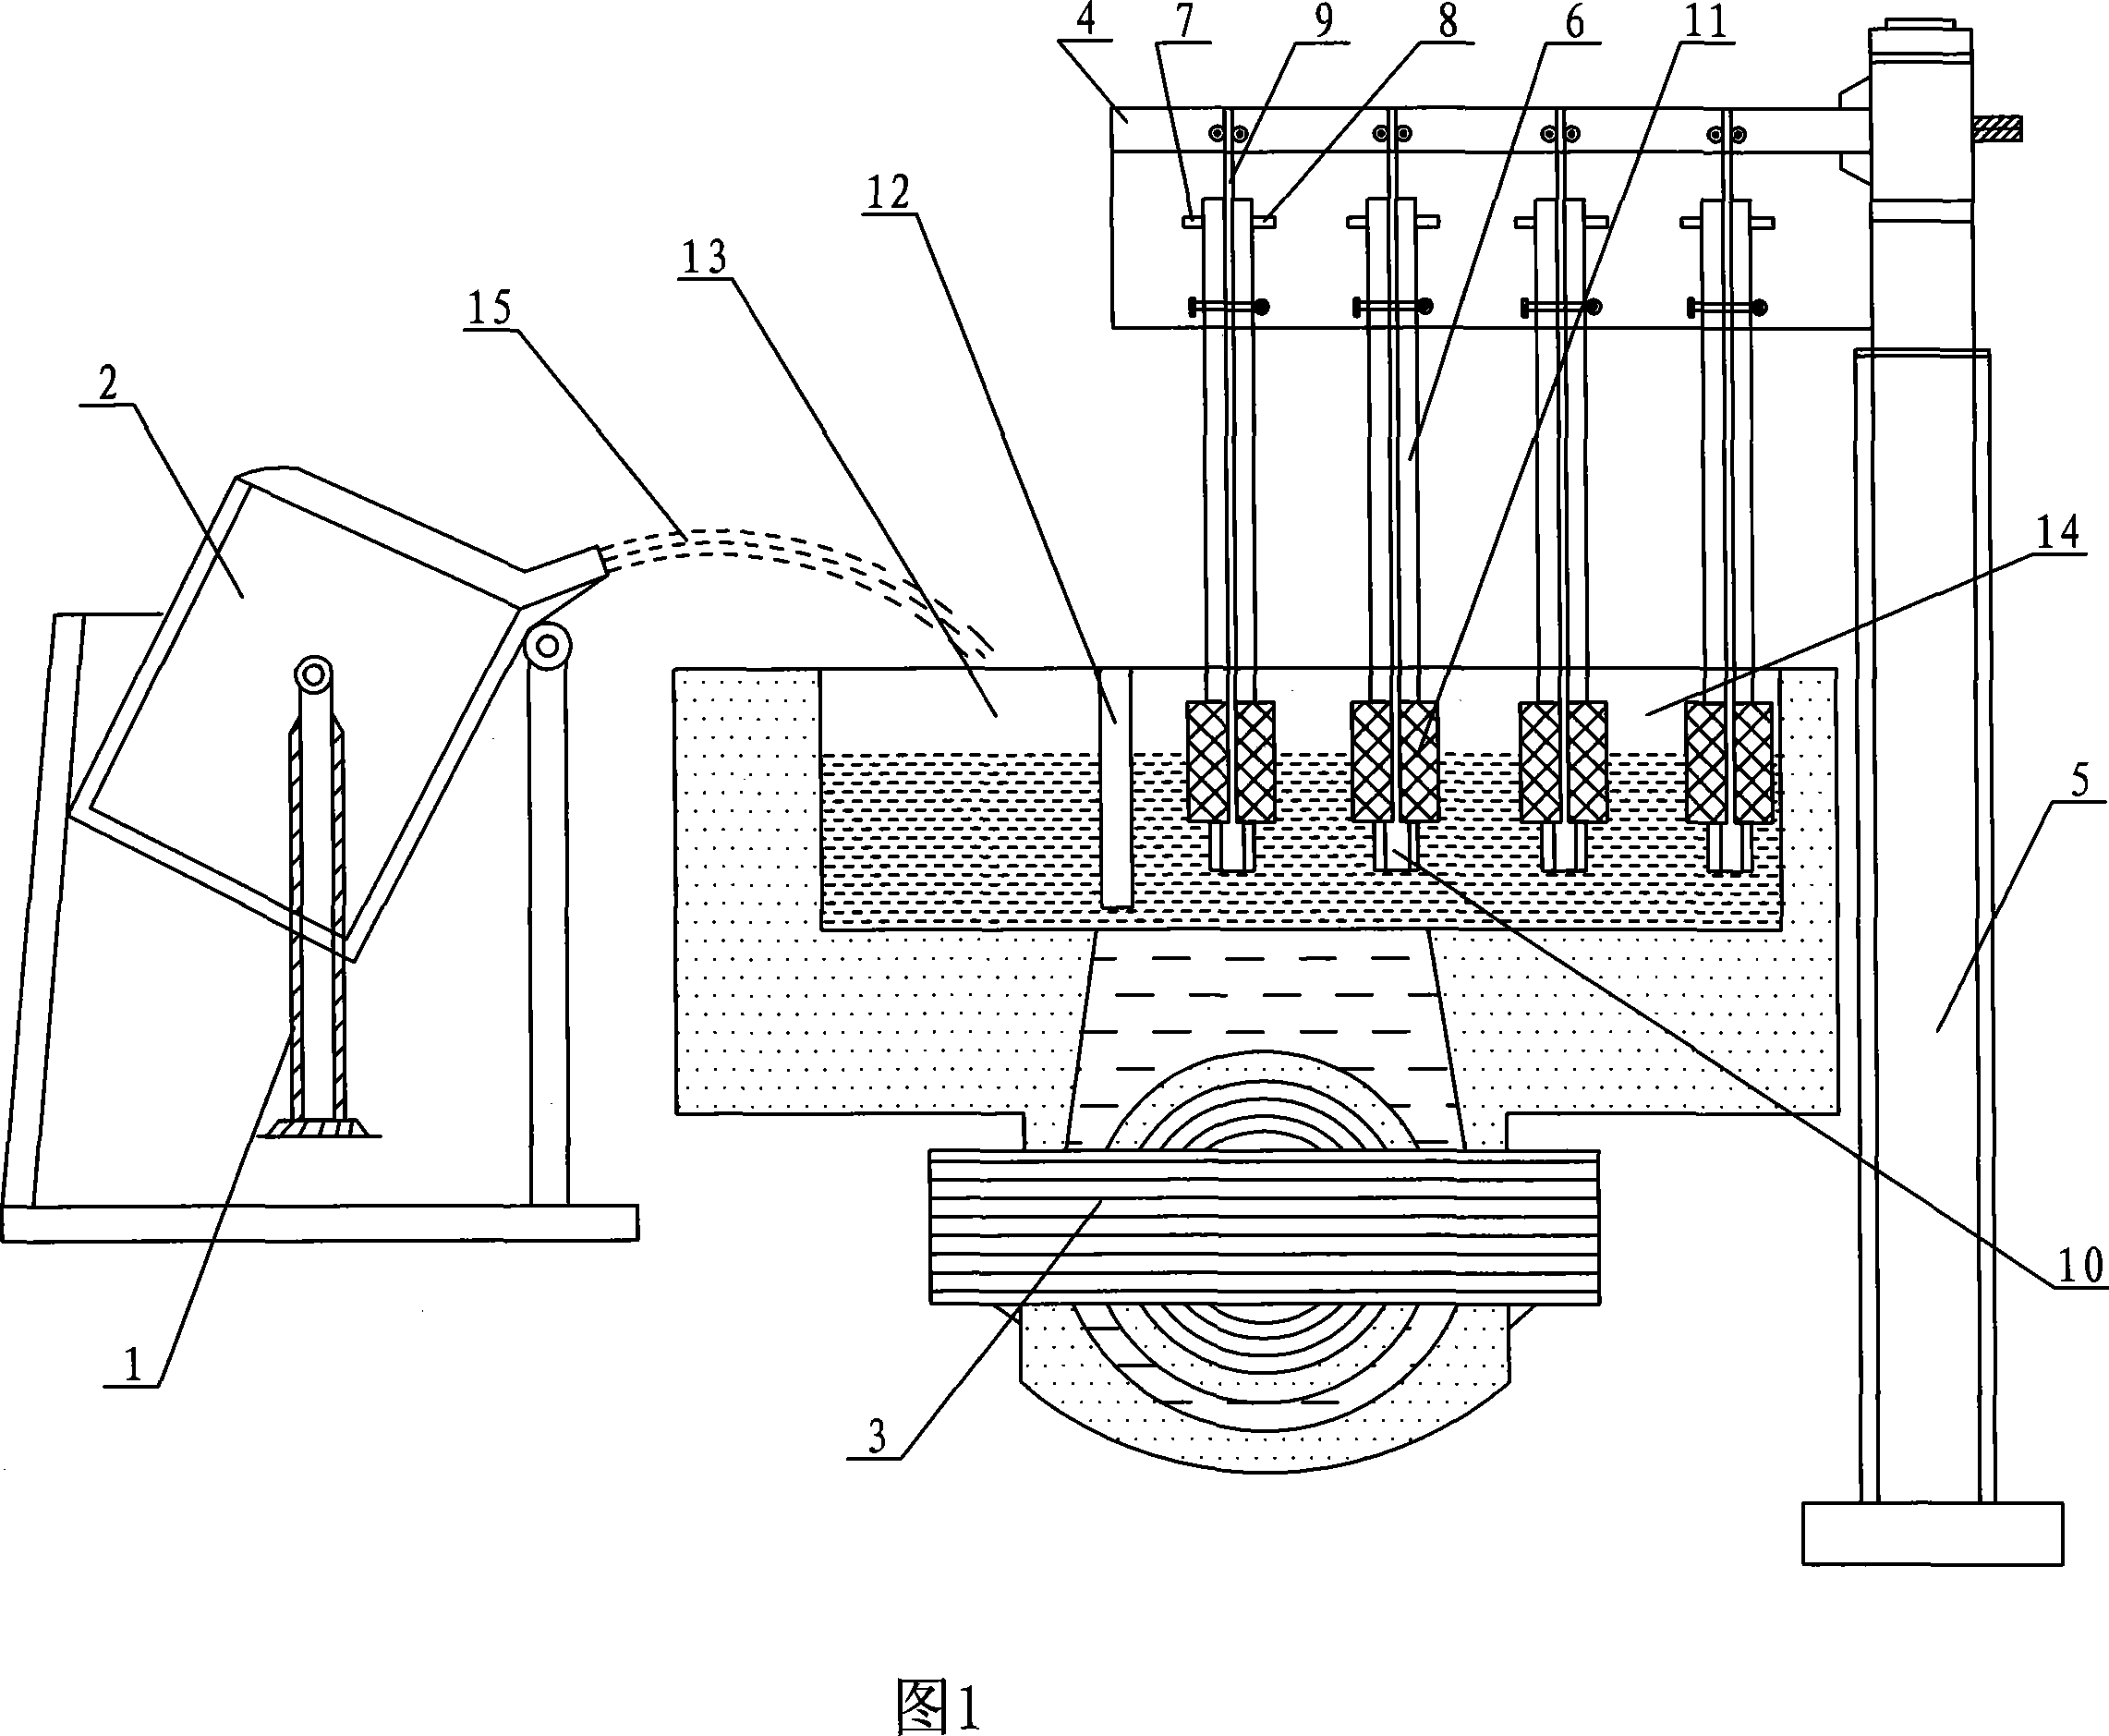 Upper-drawing casting device for the silicon bronze bar blank